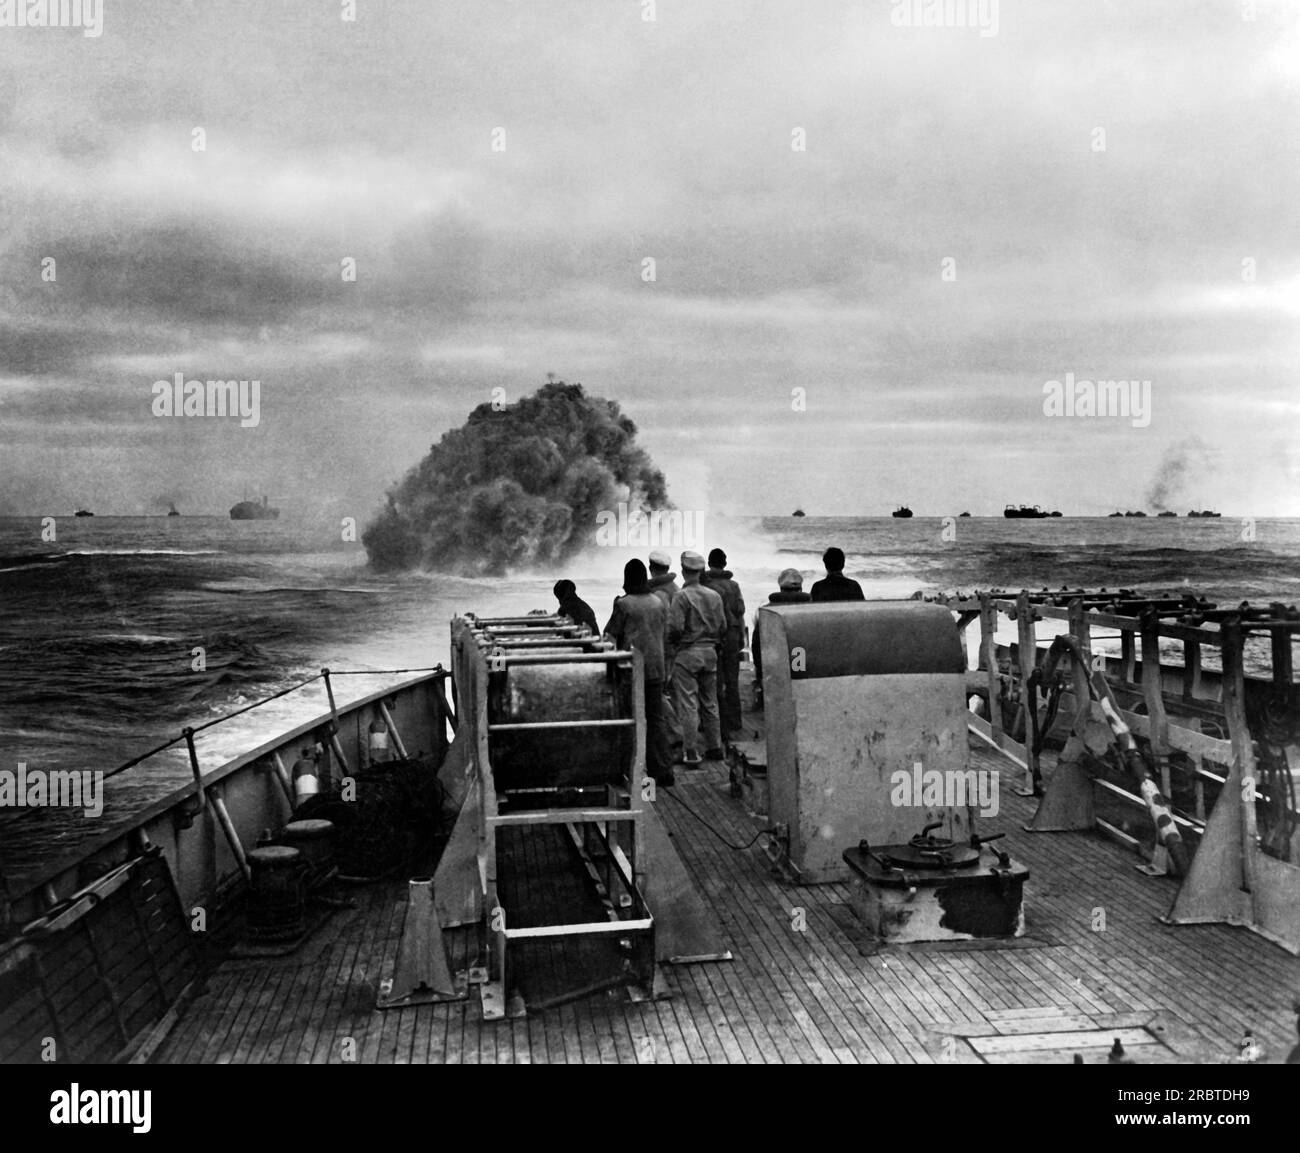 Atlantic Ocean, 1943 Coast Guardsmen on the Cutter 'Spencer' watching their depth charge explosion that blasted a Nazi U-Boat hoping to attack the convoy in the background, to the surface where it was engaged by the Coast Guard Cutter 'Spencer'. Stock Photo